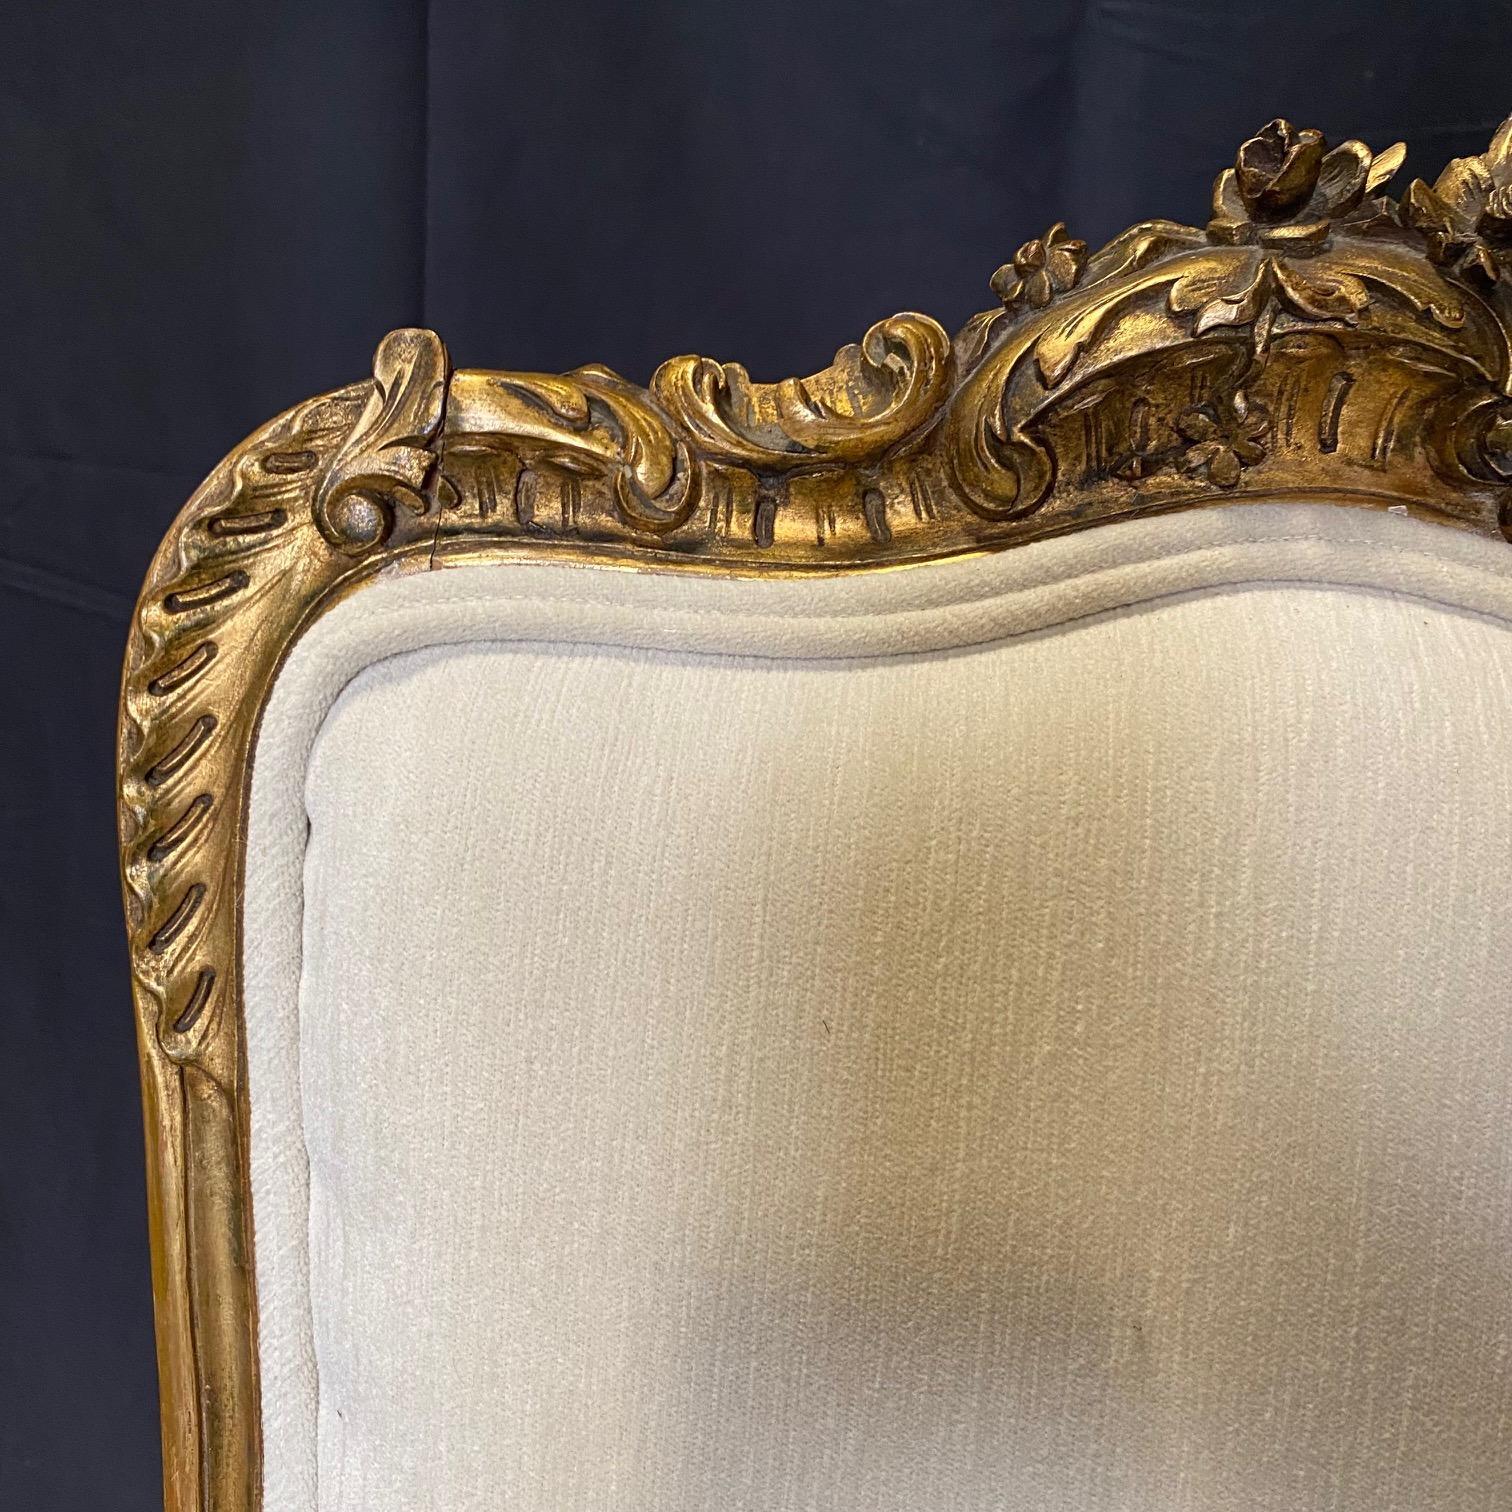  Pair of Antique French Louis XV Fauteuil Gilded Arm Chairs  For Sale 1